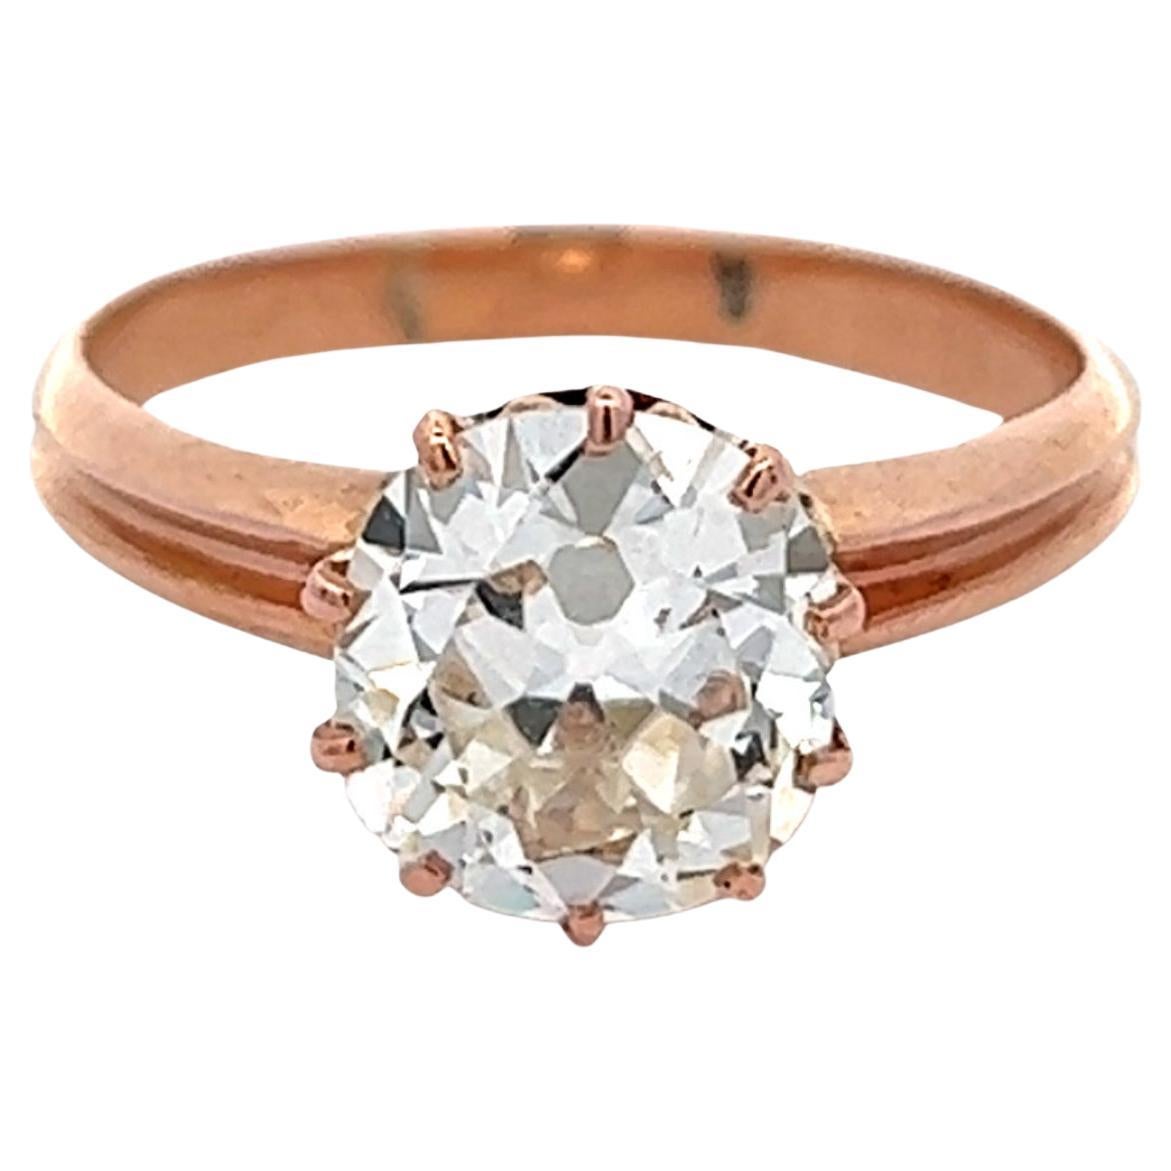 Victorian GIA 2.91 Carats Old Mine Cut Diamond 14k Rose Gold Solitaire Ring